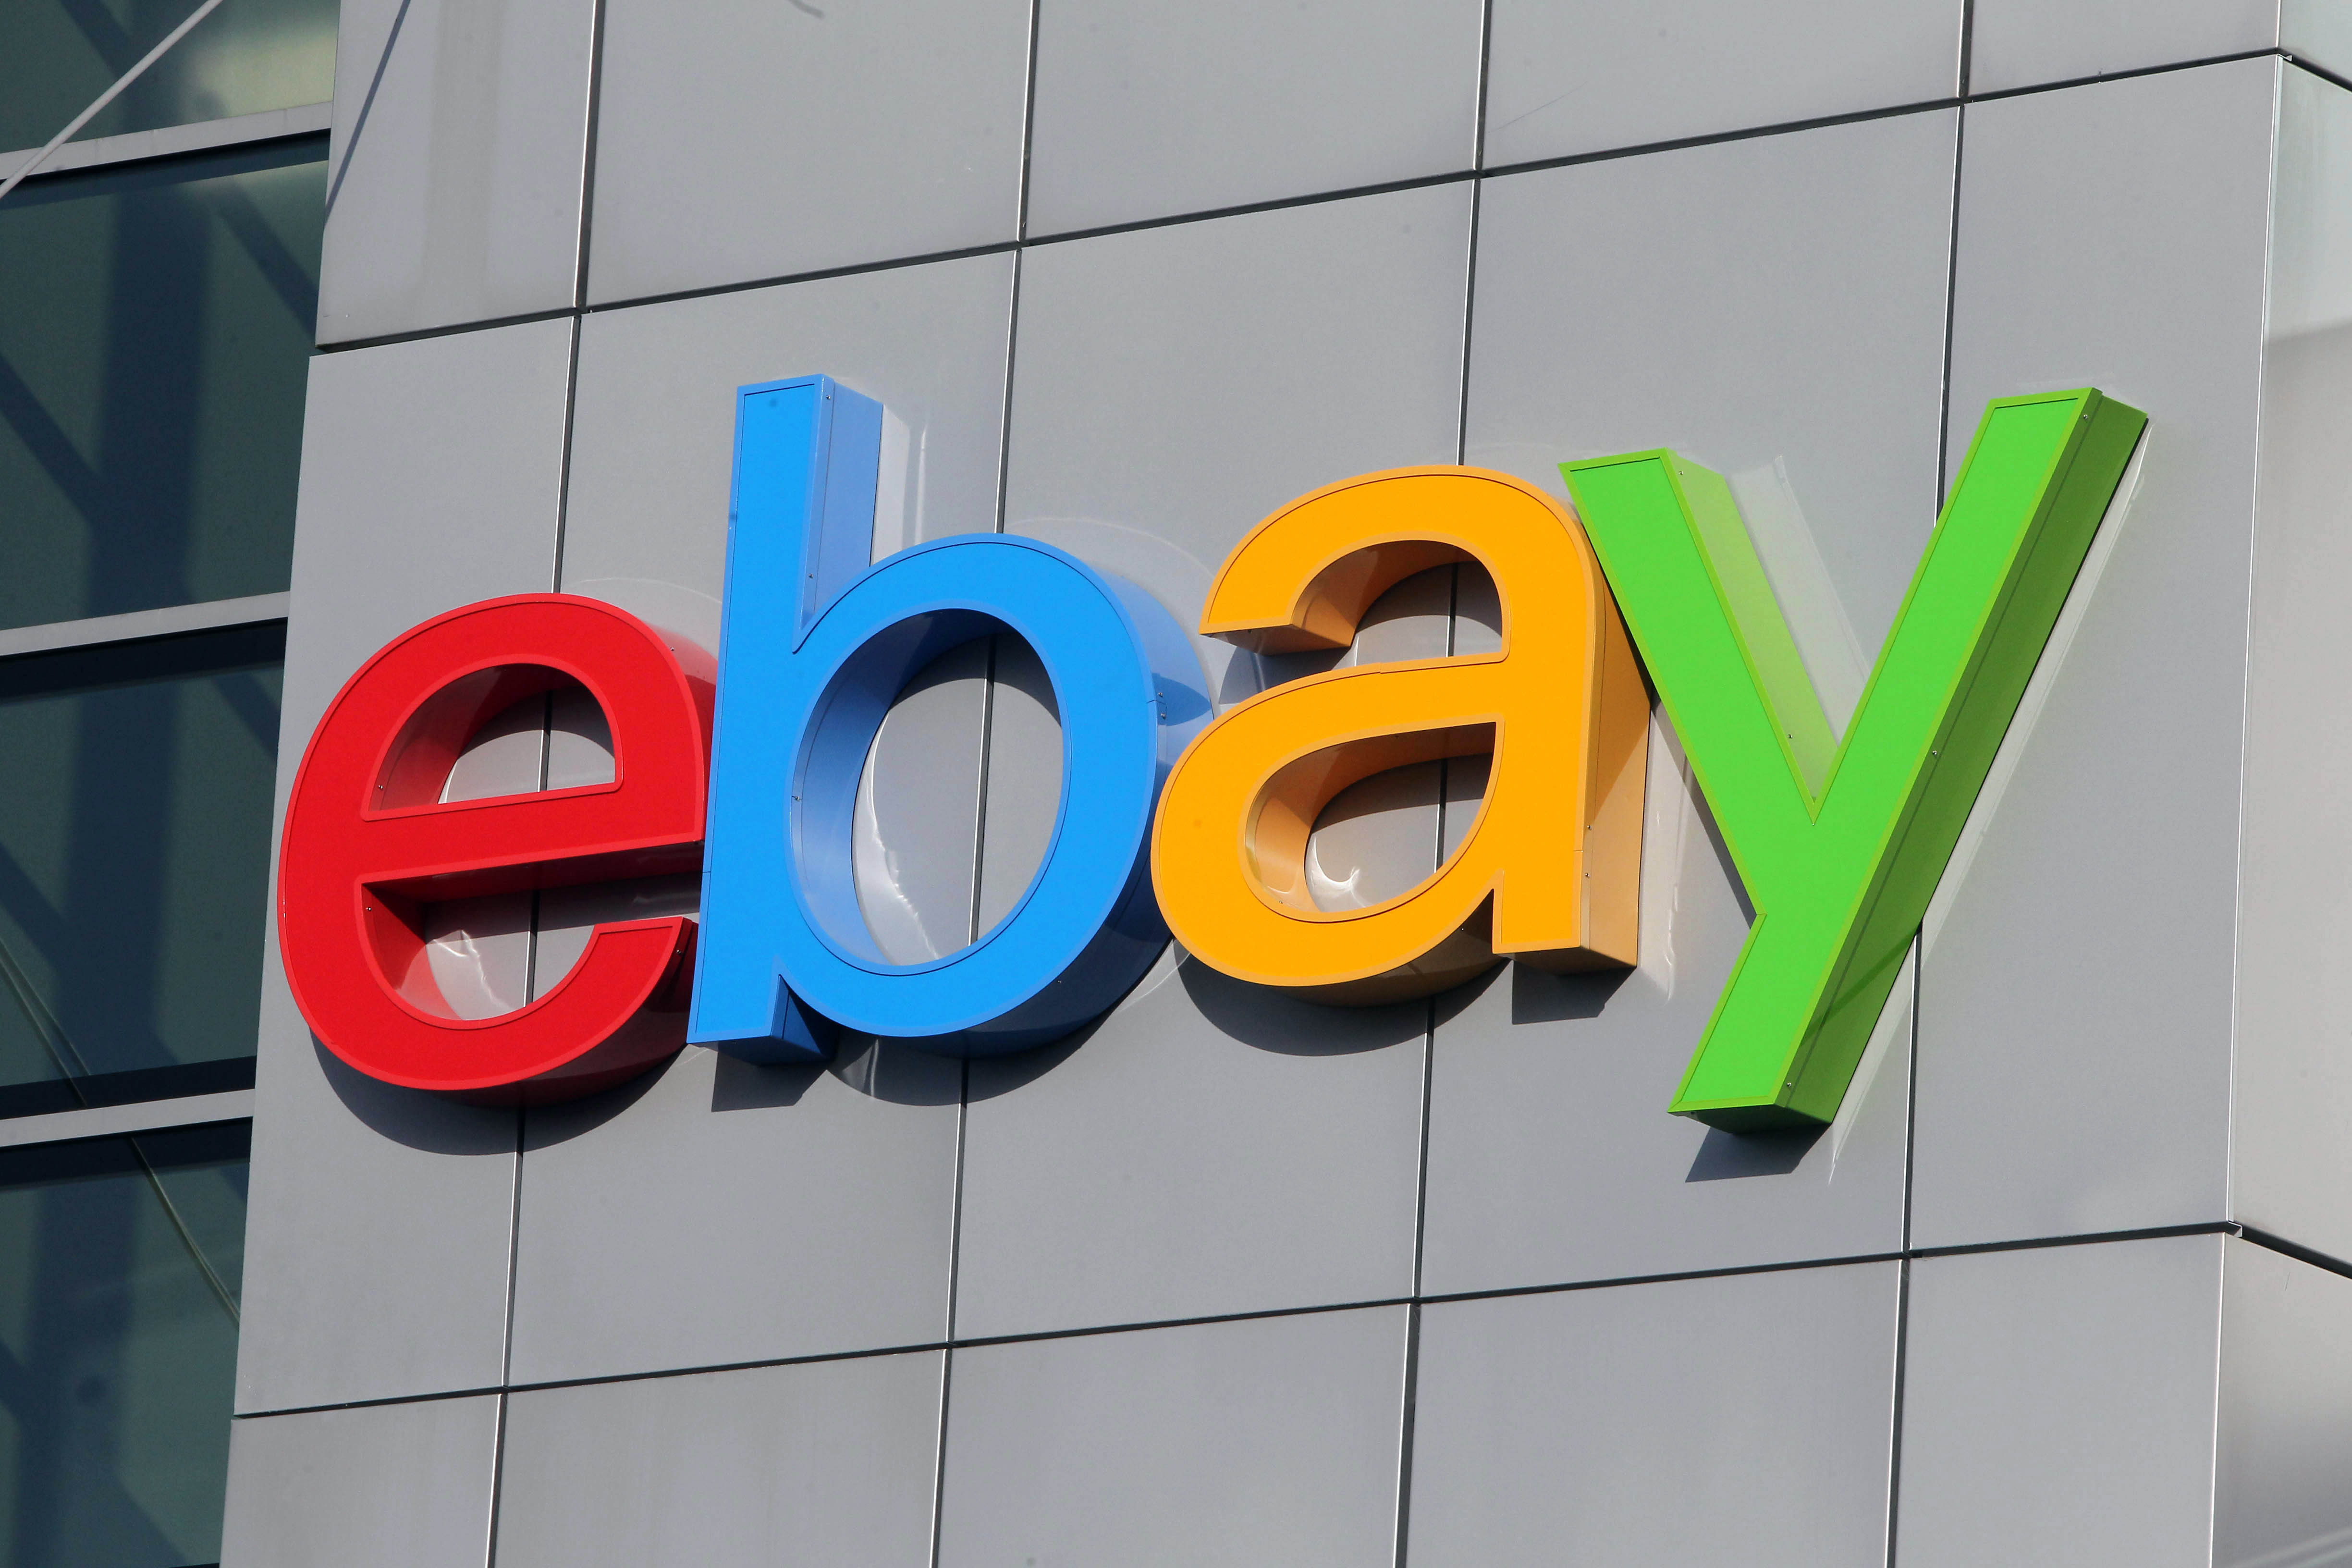 eBay DOWN - Fury as auction not working across the UK 